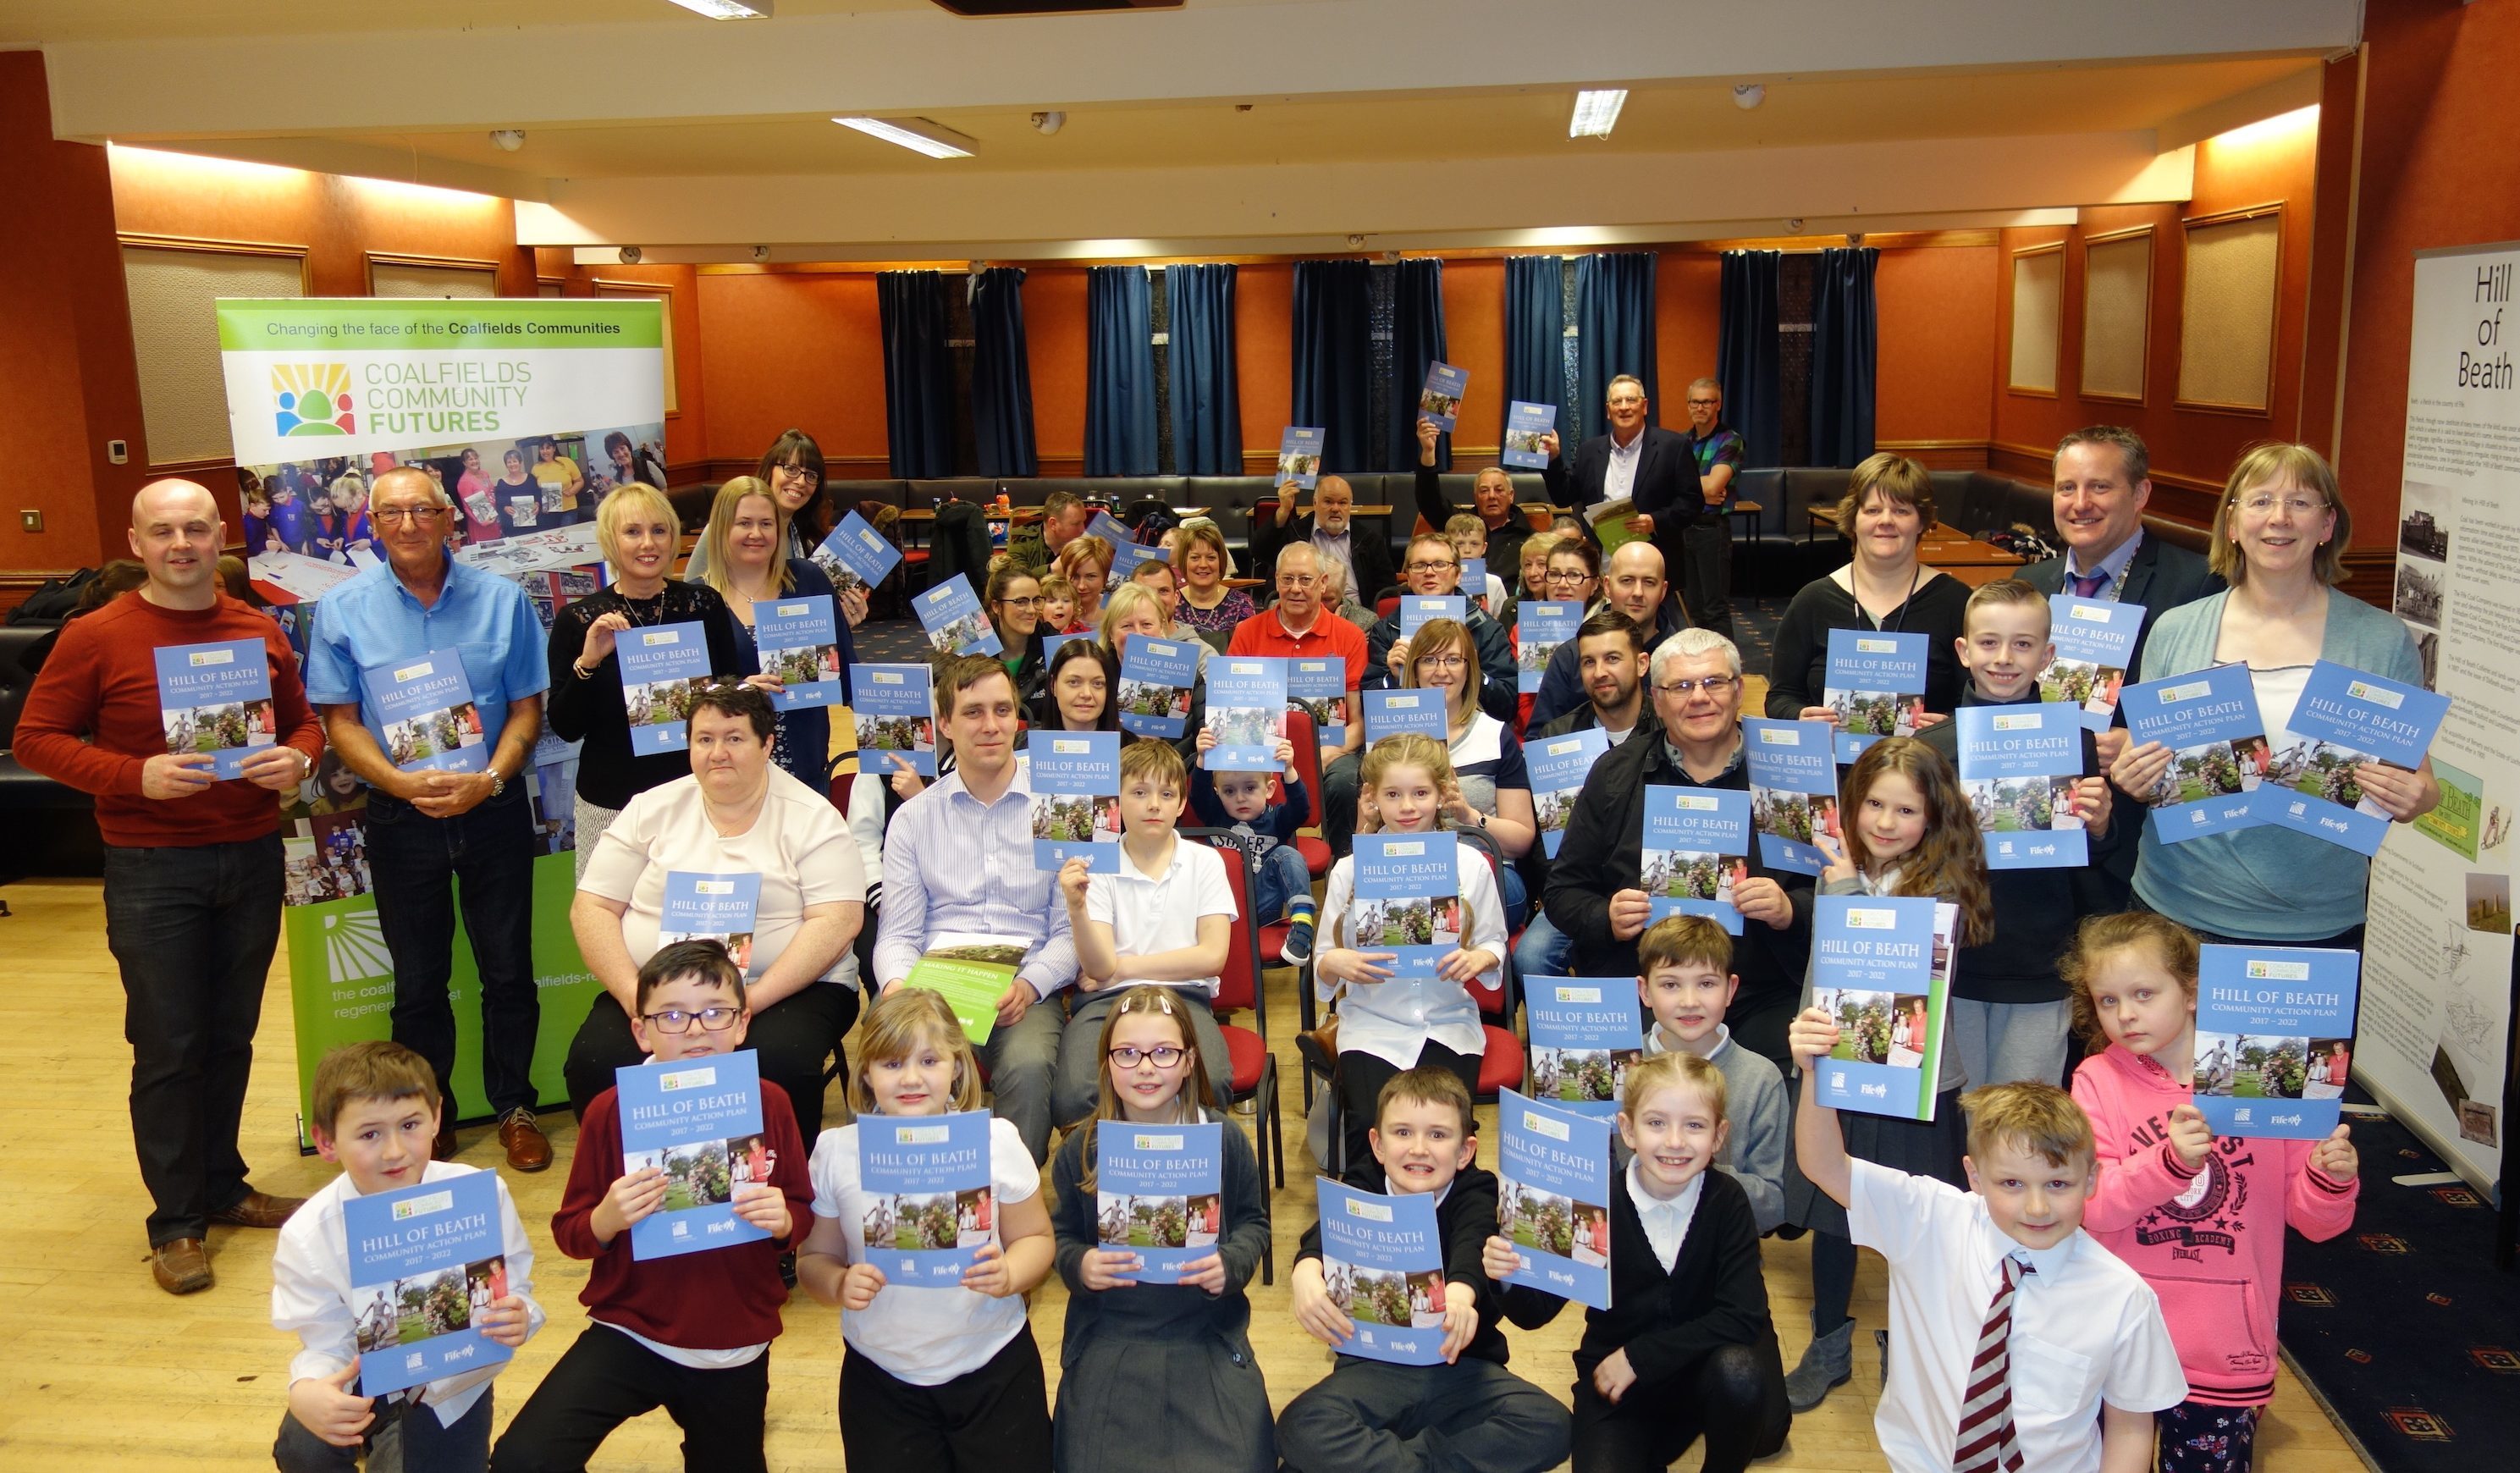 Hill of Beath launches its action plan